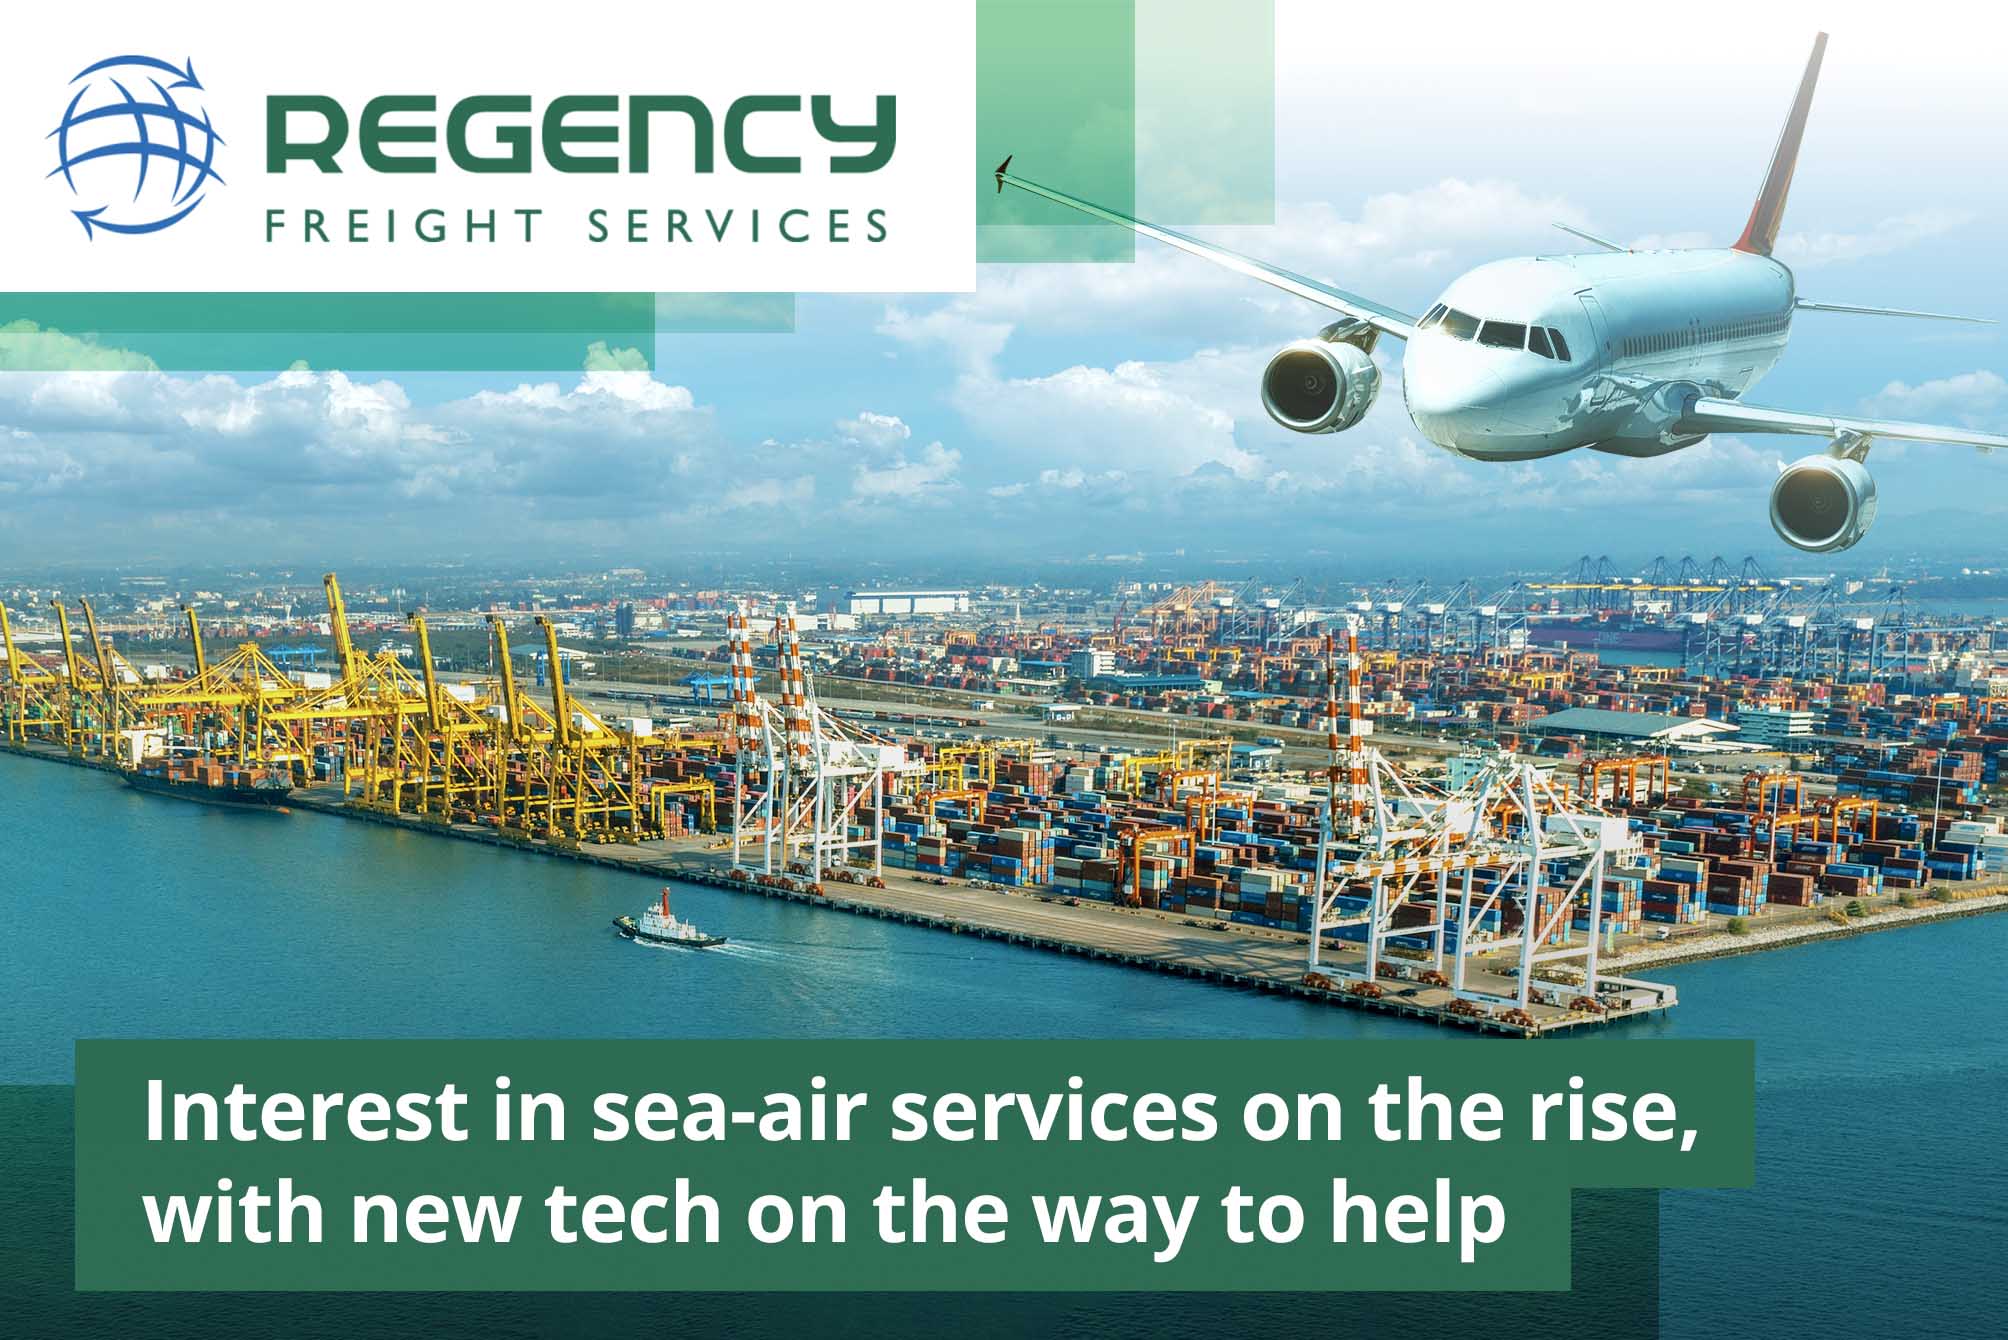 Interest in sea-air services on the rise, with new tech on the way to help